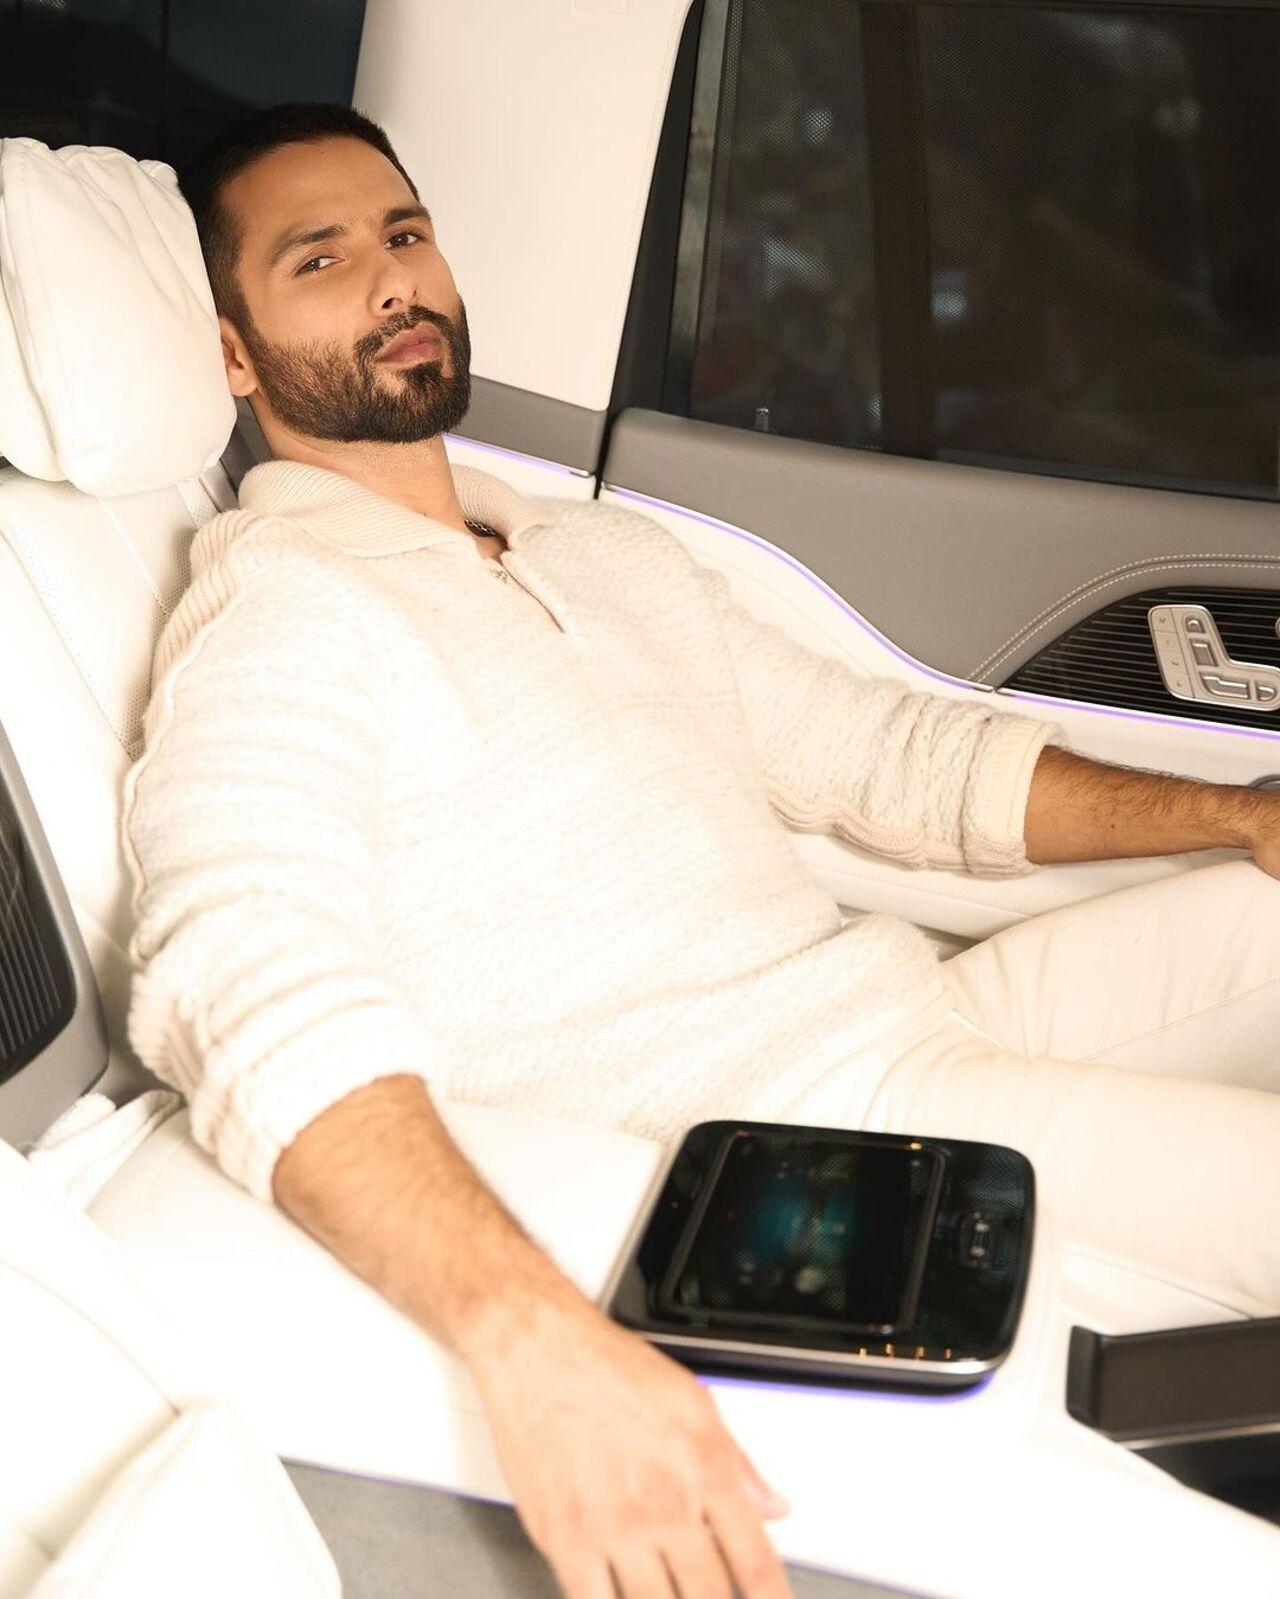 Making a case for the white-on-white trend, Shahid Kapoor looks at ease in this outfit that is perfect for the Mumbai winter